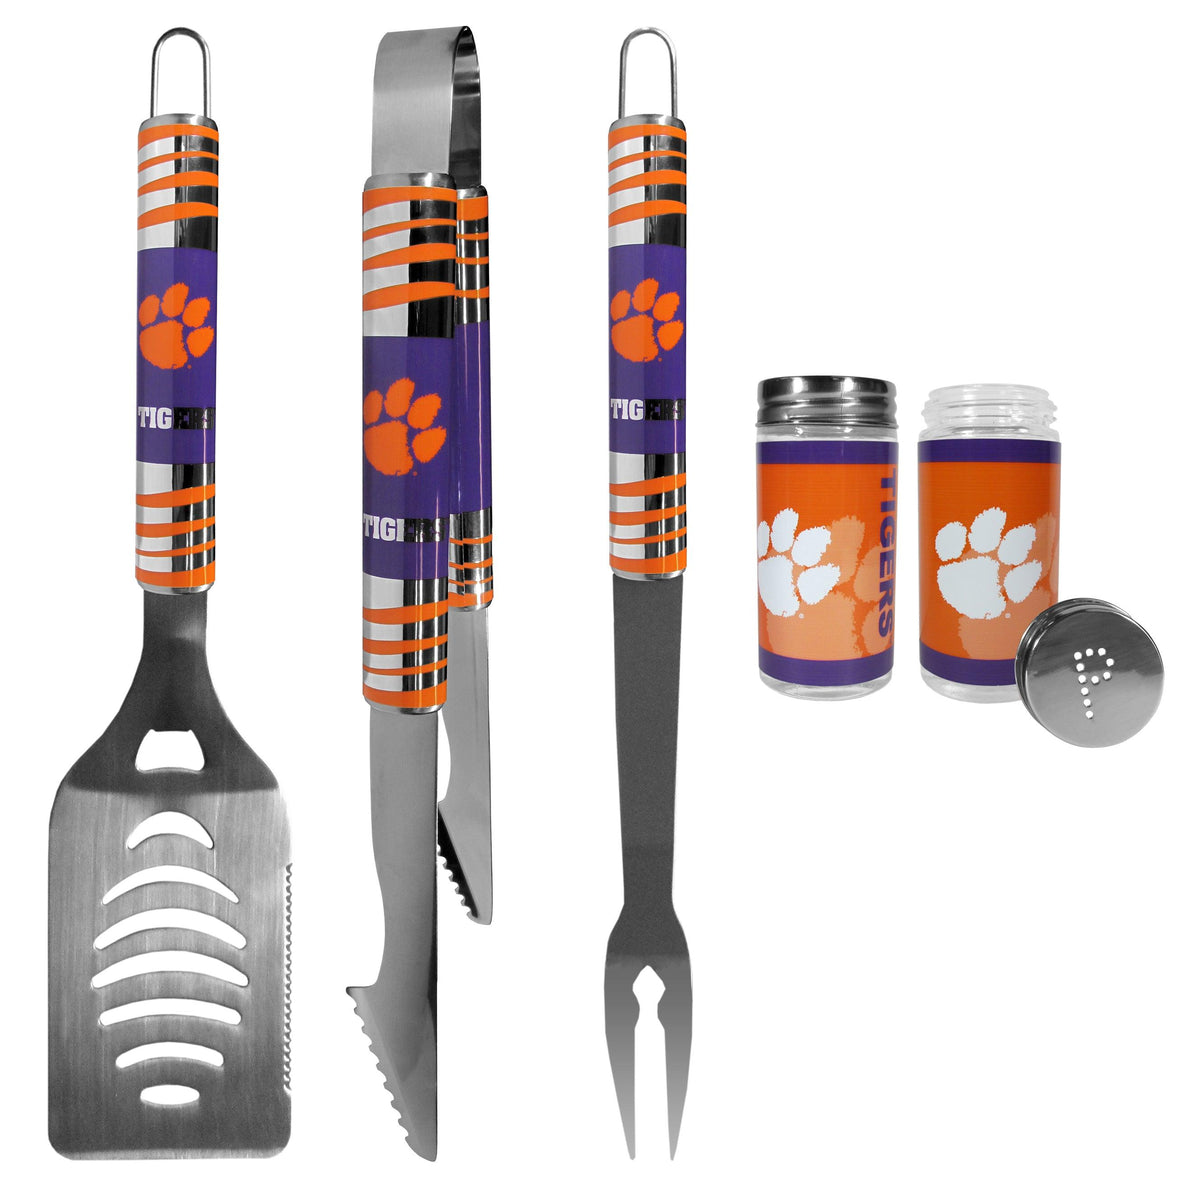 Clemson Tigers 3 pc Tailgater BBQ Set and Salt and Pepper Shaker Set - Flyclothing LLC